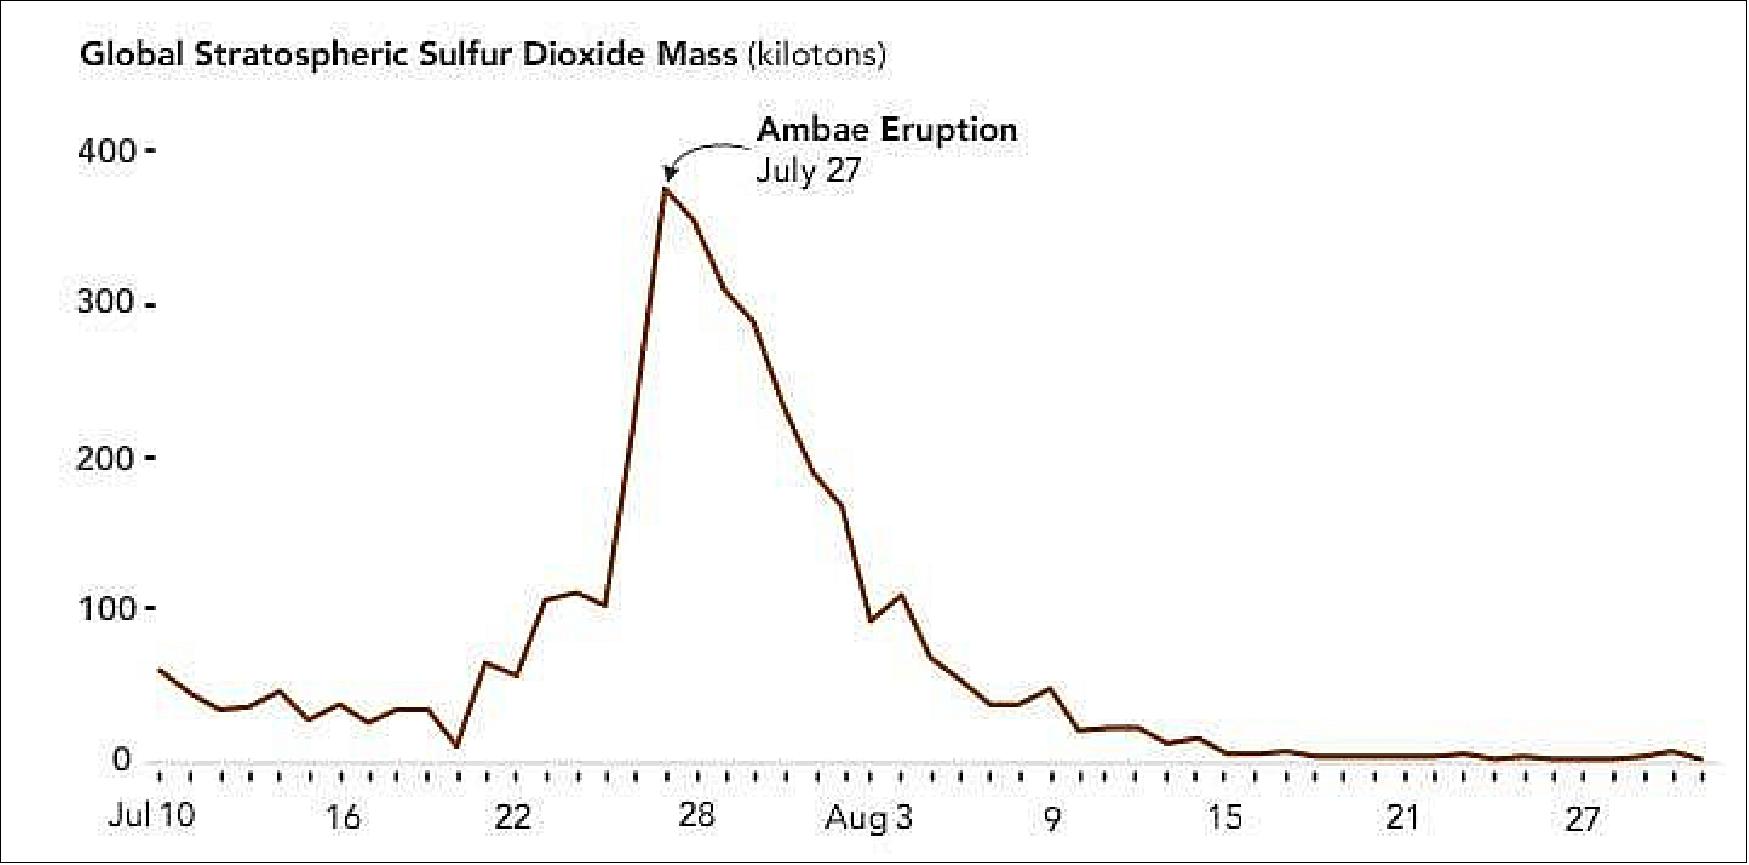 Figure 59: The plot shows the July-August spike in emissions from Ambae (image credit: Image by Lauren Dauphin, NASA Earth Observatory, using OMPS data from GES DISC and Simon Carn)